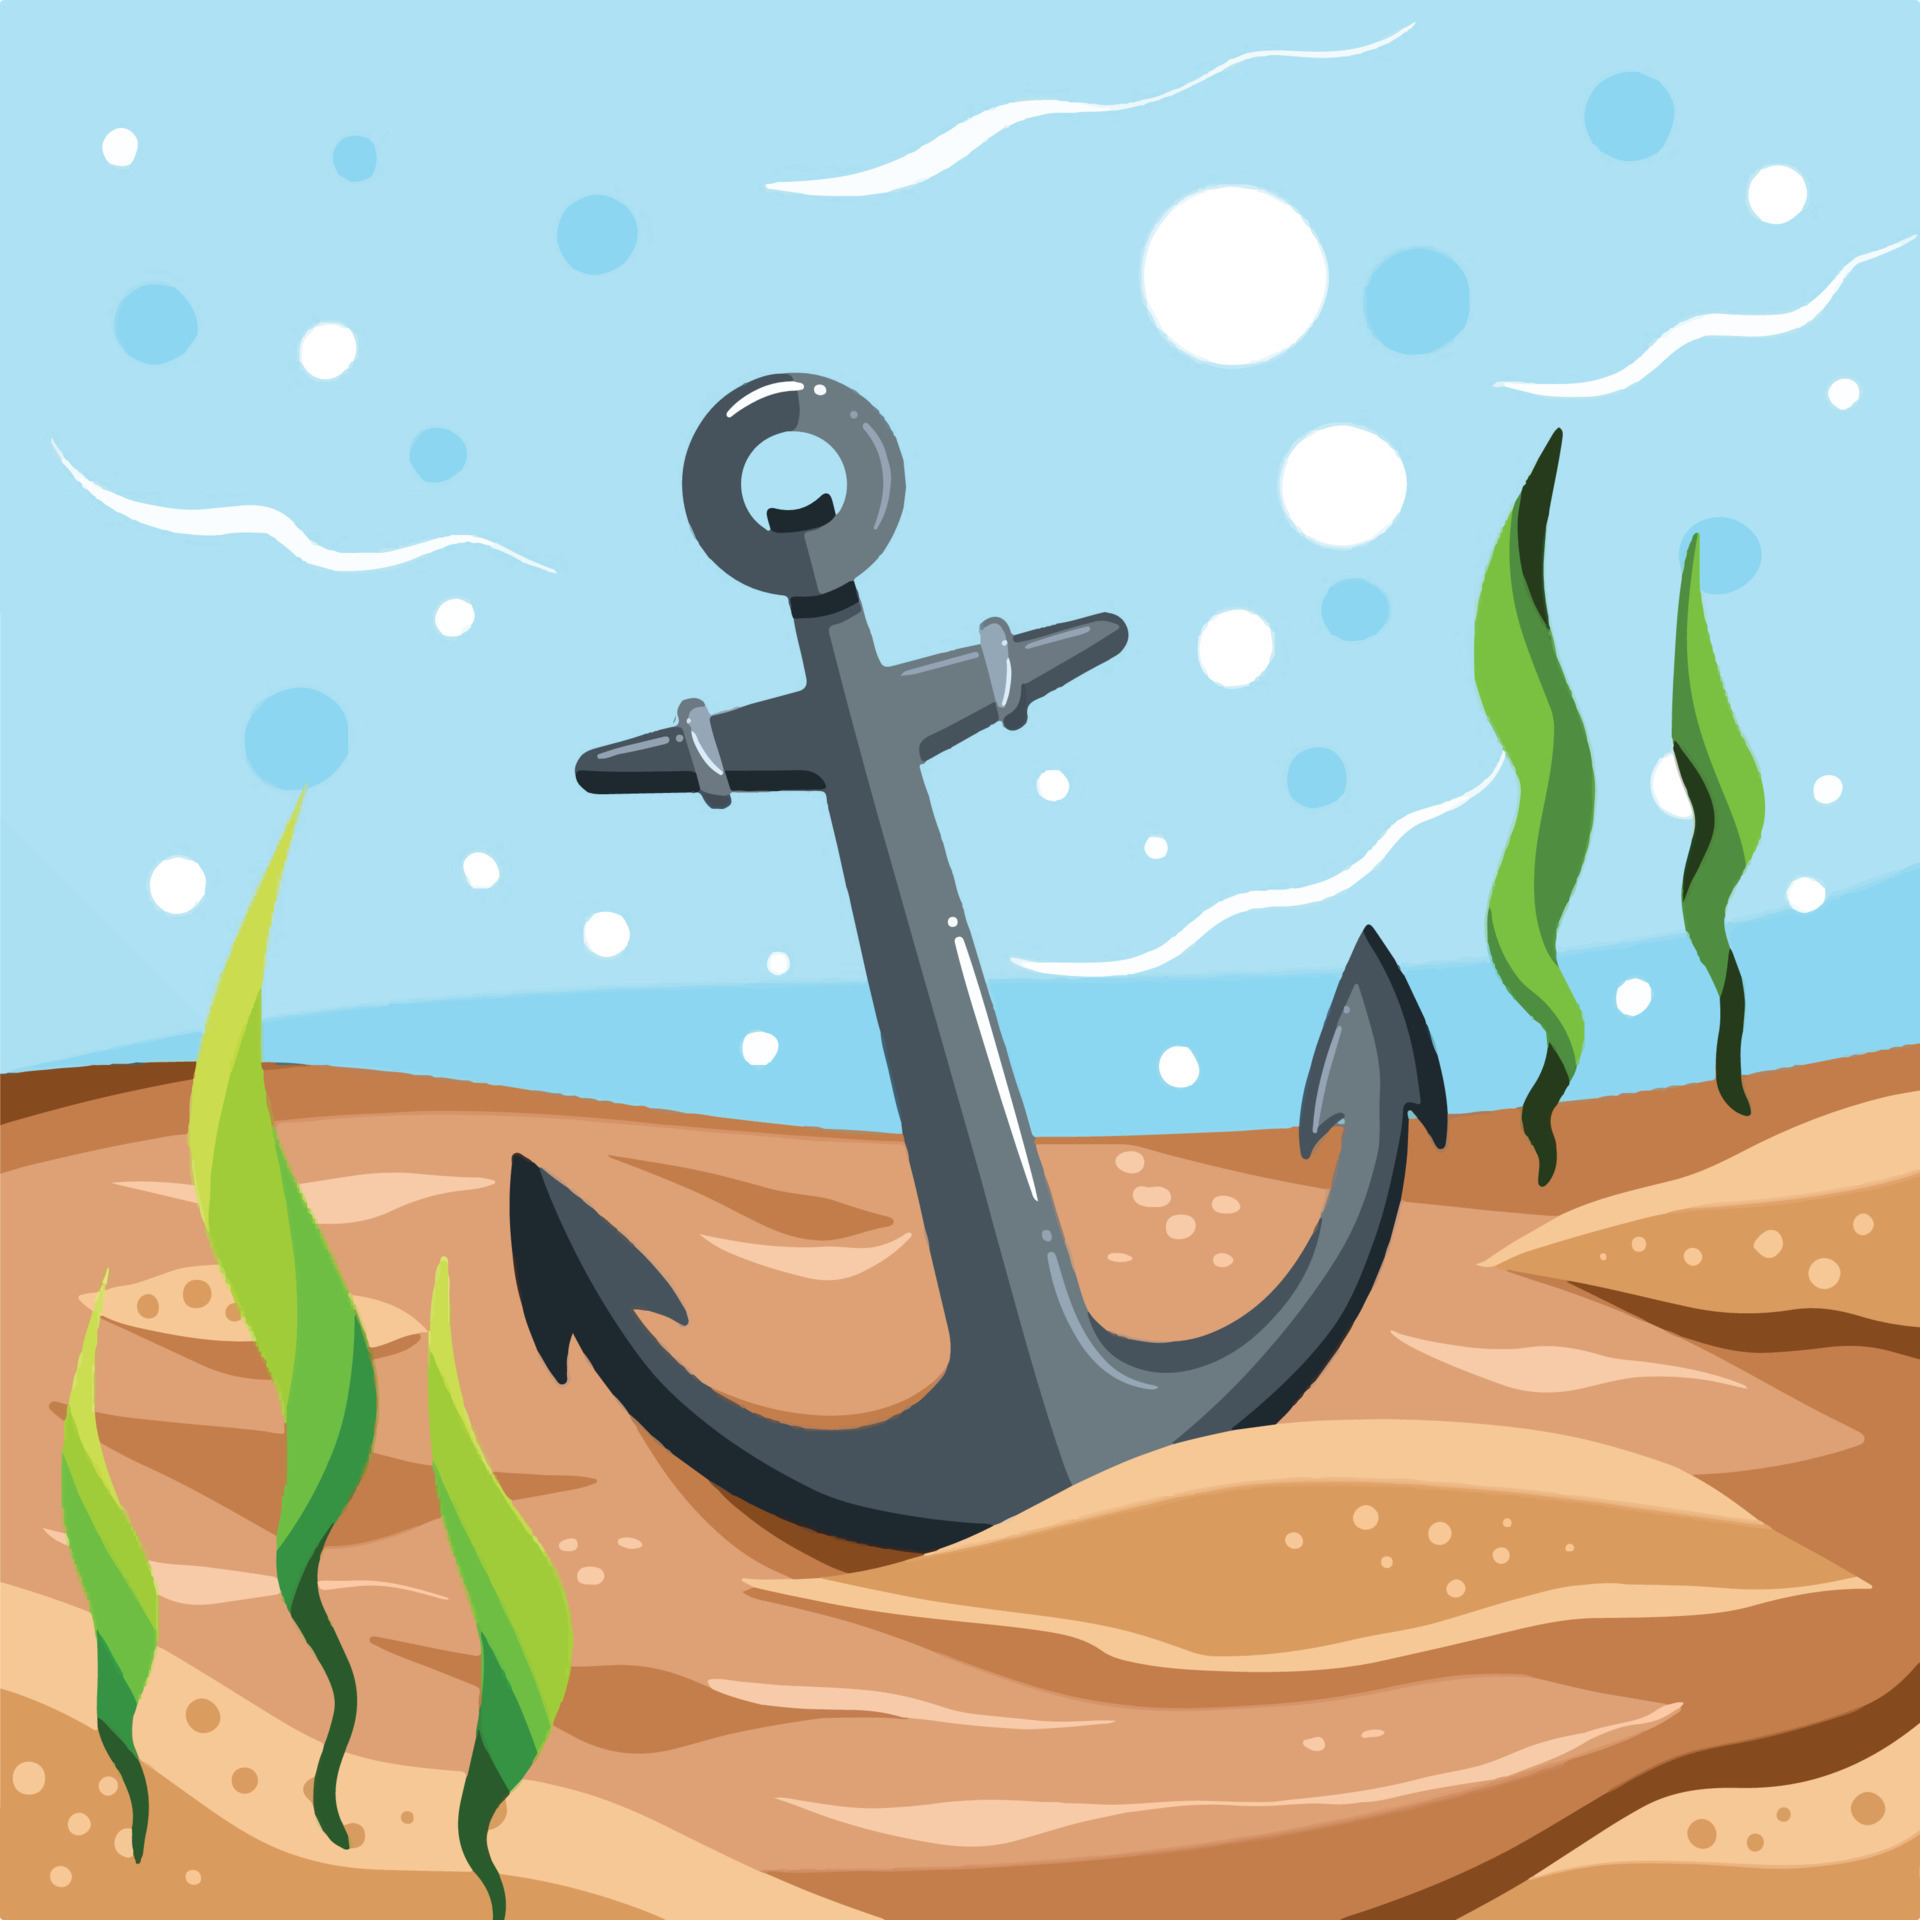 Anchor made from steel sinking in the bottom of the ocean sand vector  illustration. Under the sea with sand, seaweed, and sea bubbles decoration.  Cartoon styled art style flat square drawing. 14746057